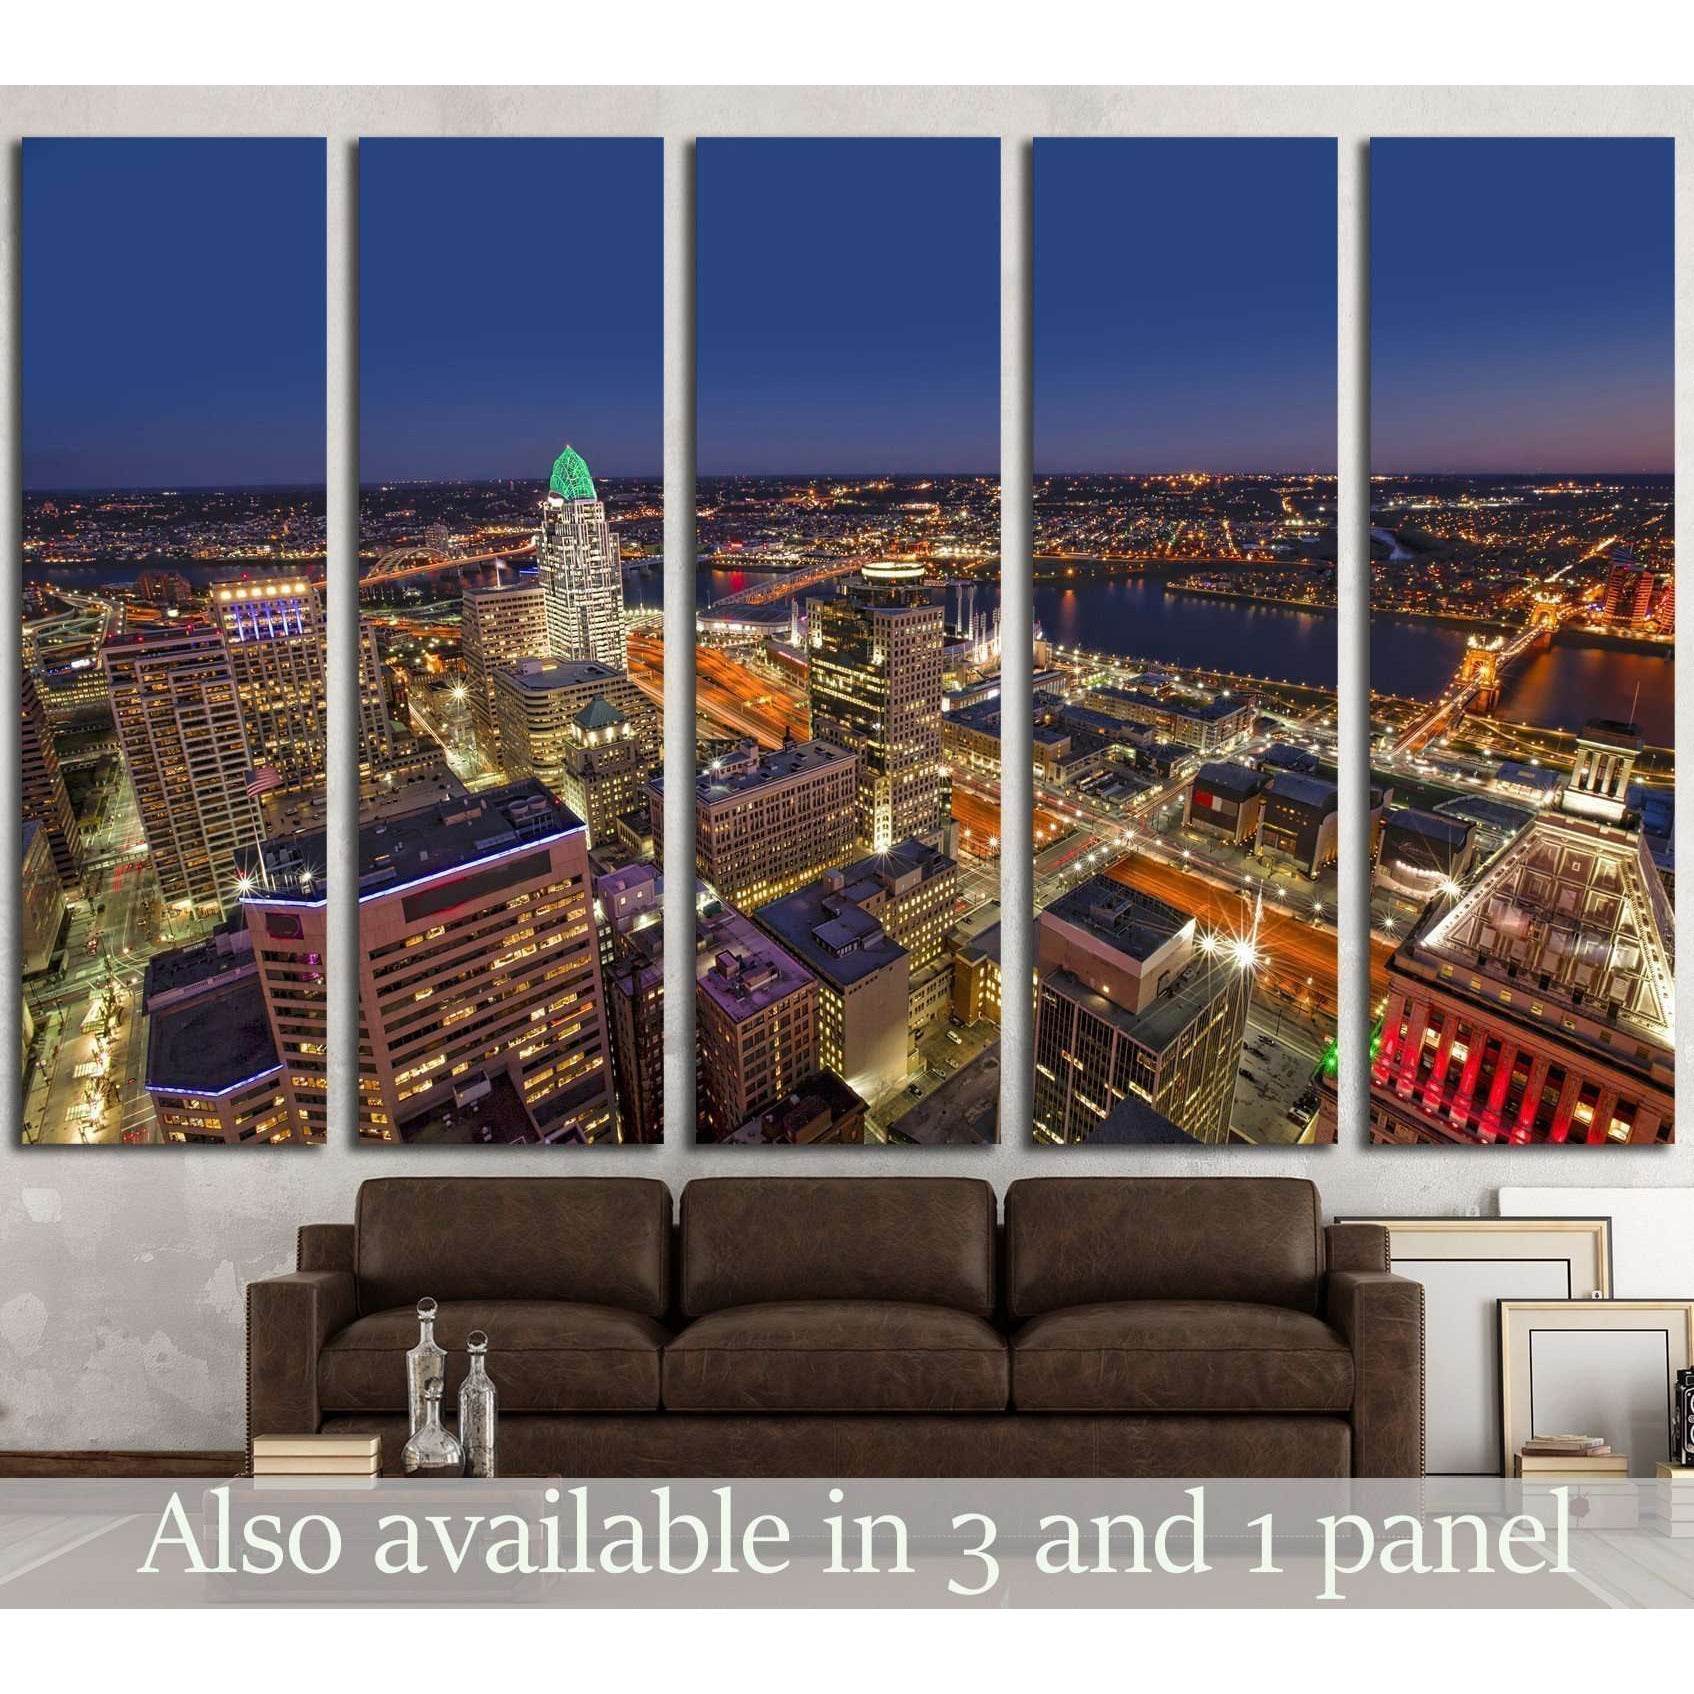 Looking south east at the beautiful skyline of downtown Cincinnati №1719 Ready to Hang Canvas Print